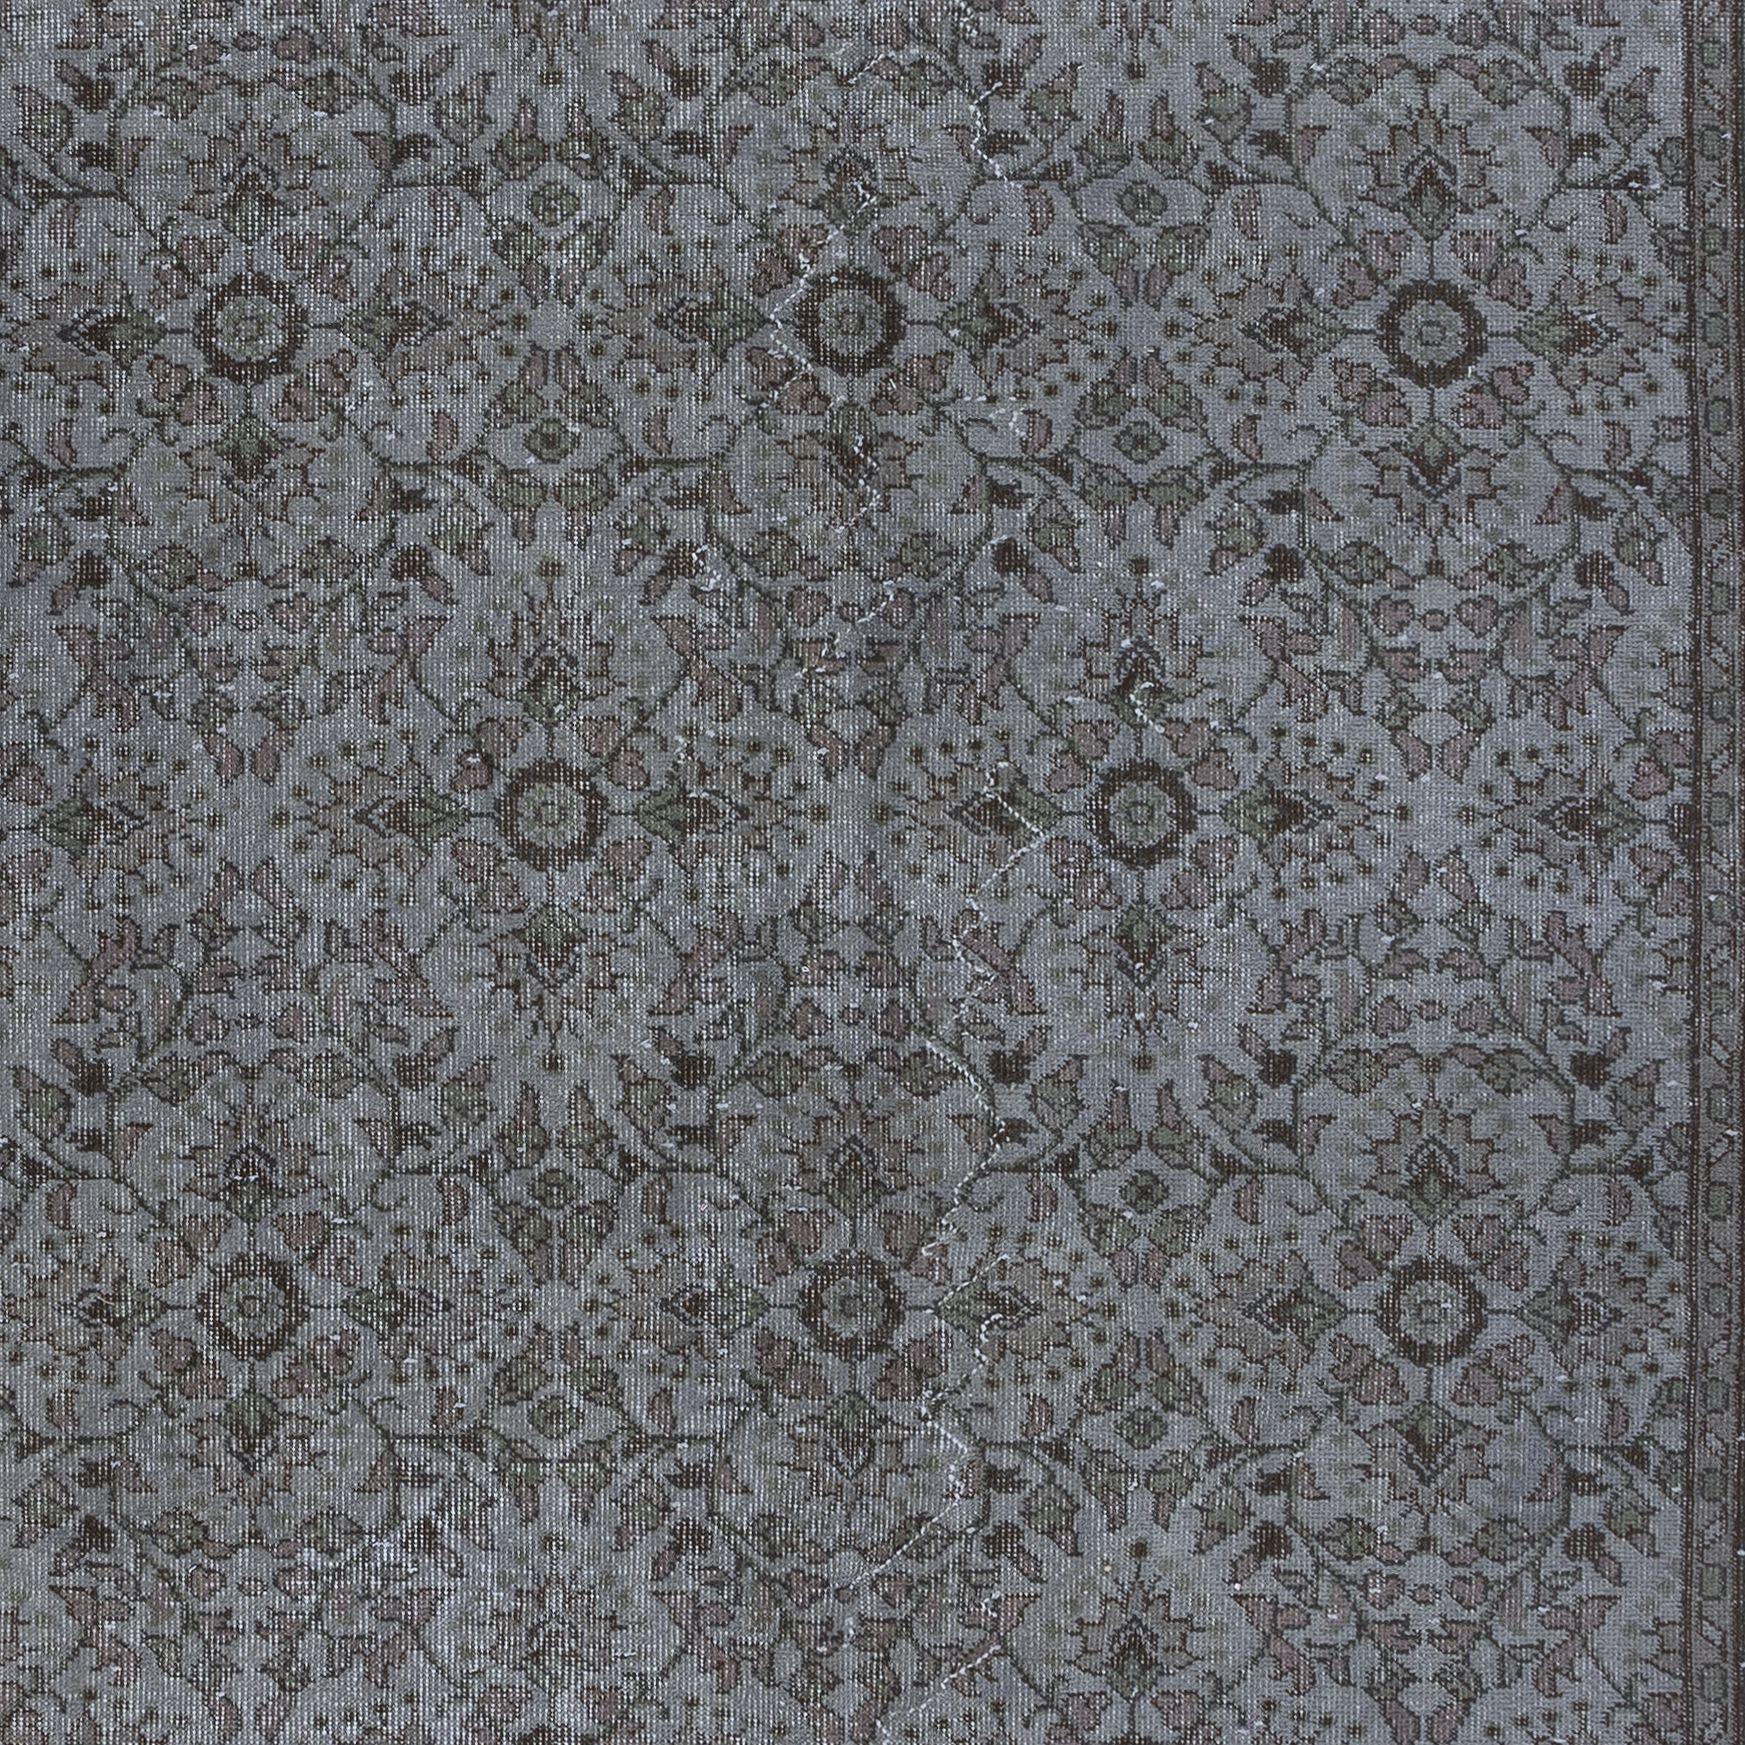 6x9.4 Ft Upcycled Handmade Area Rug in Gray, Contemporary Turkish Carpet In Good Condition For Sale In Philadelphia, PA